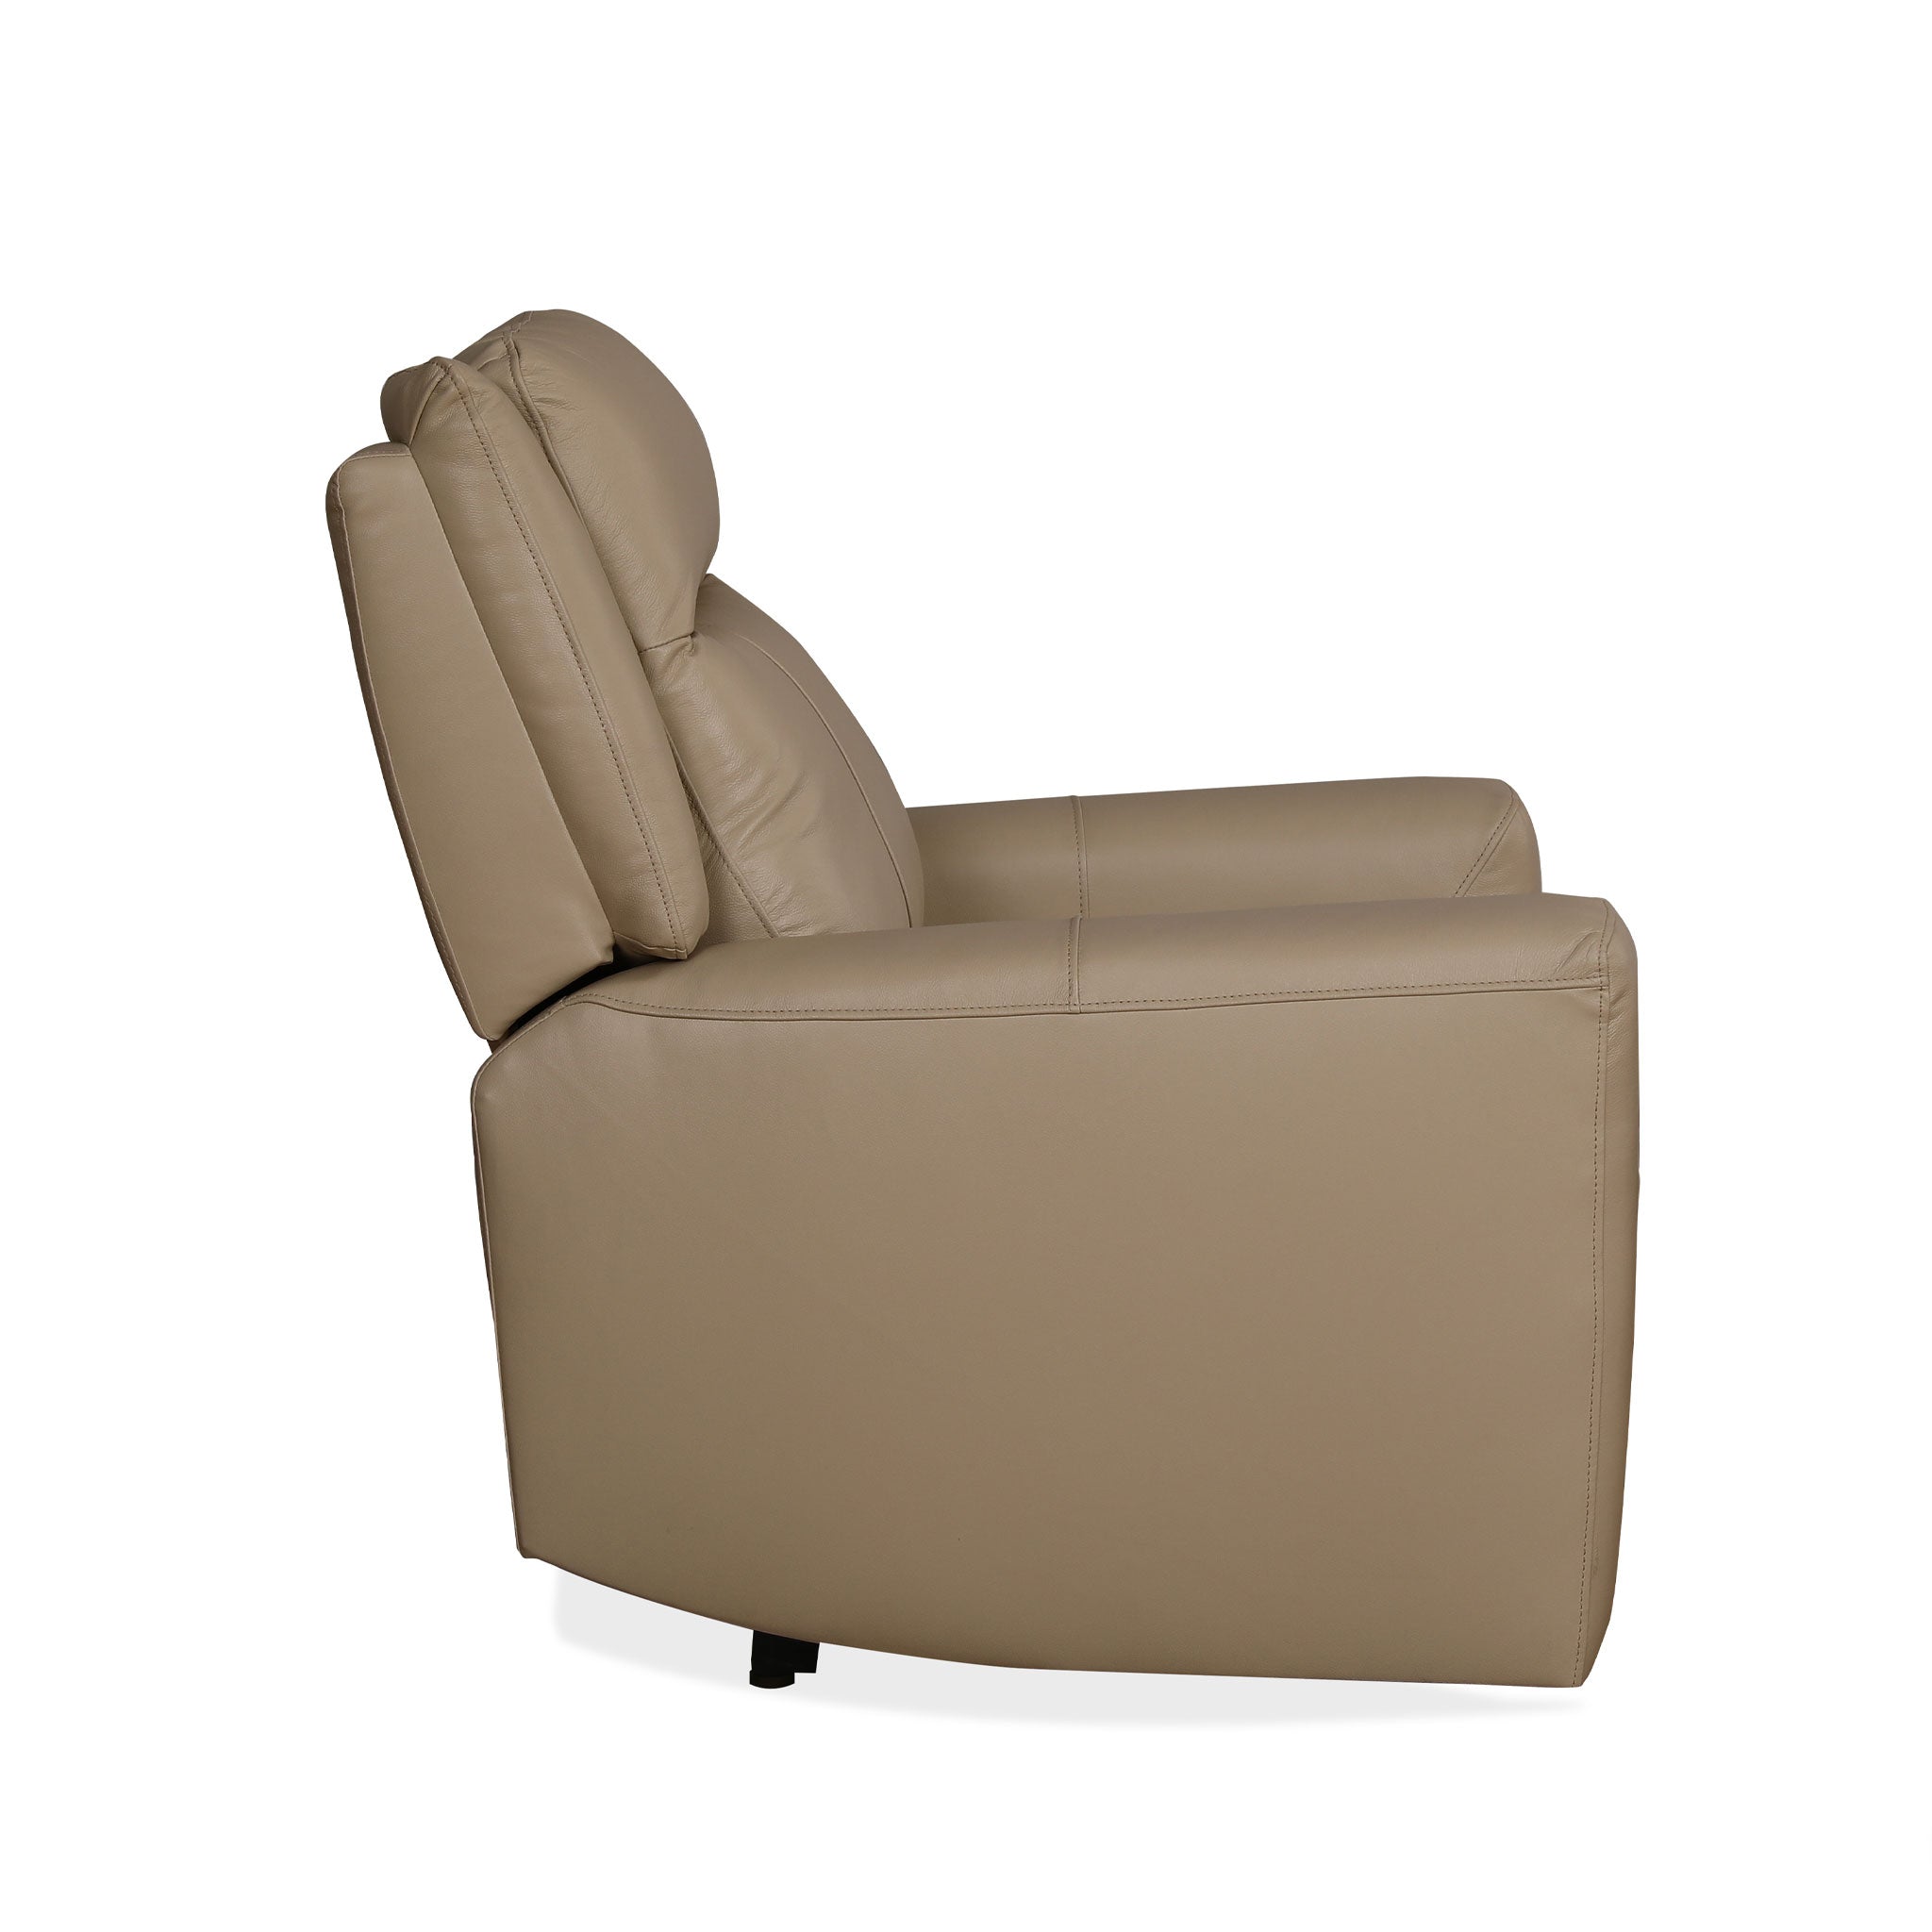 Colby Leather Power Recliner Chair